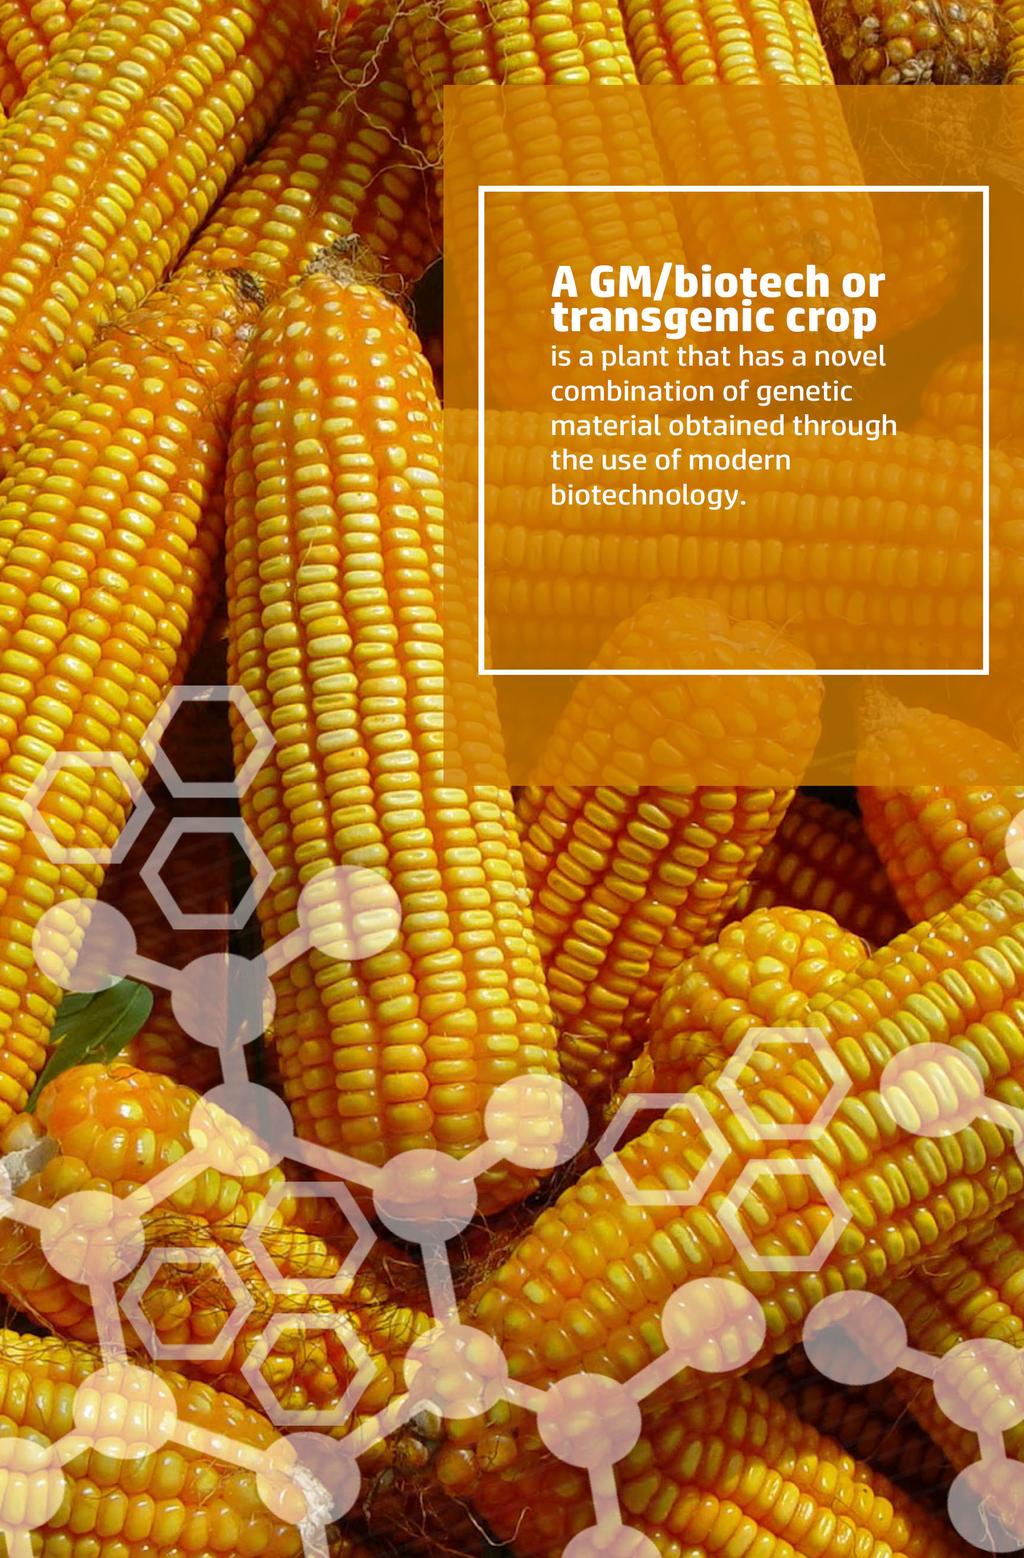 WHAT IS A GM/BIOTECH CROP? A GM/biotech or transgenic crop is a plant that has a novel combination of genetic material obtained through the use of modern biotechnology.